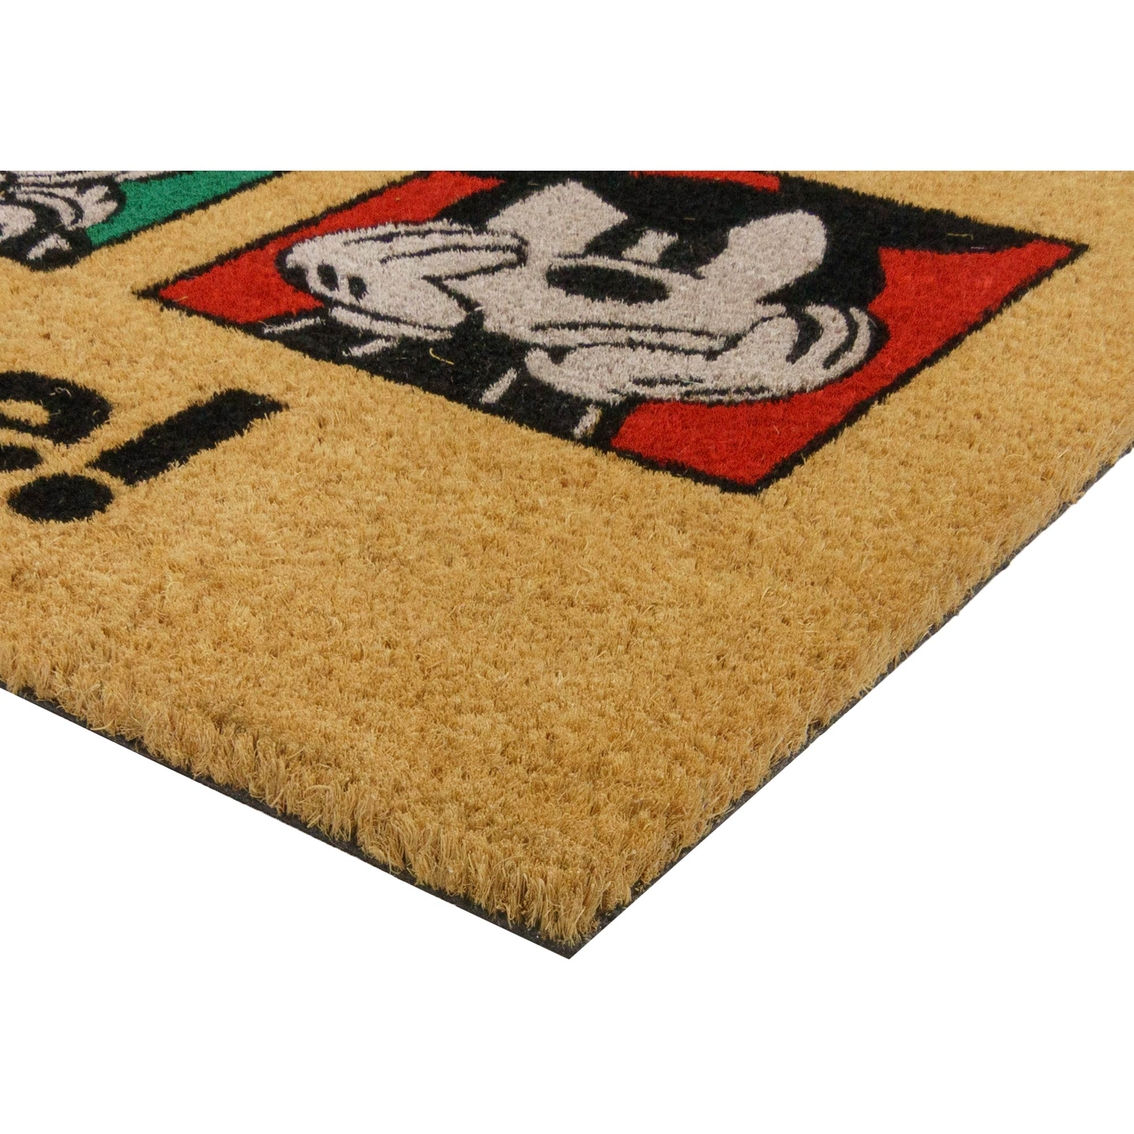 Disney Mickey Mouse Hi There Coir Mat Set 2 pk. - Image 5 of 7